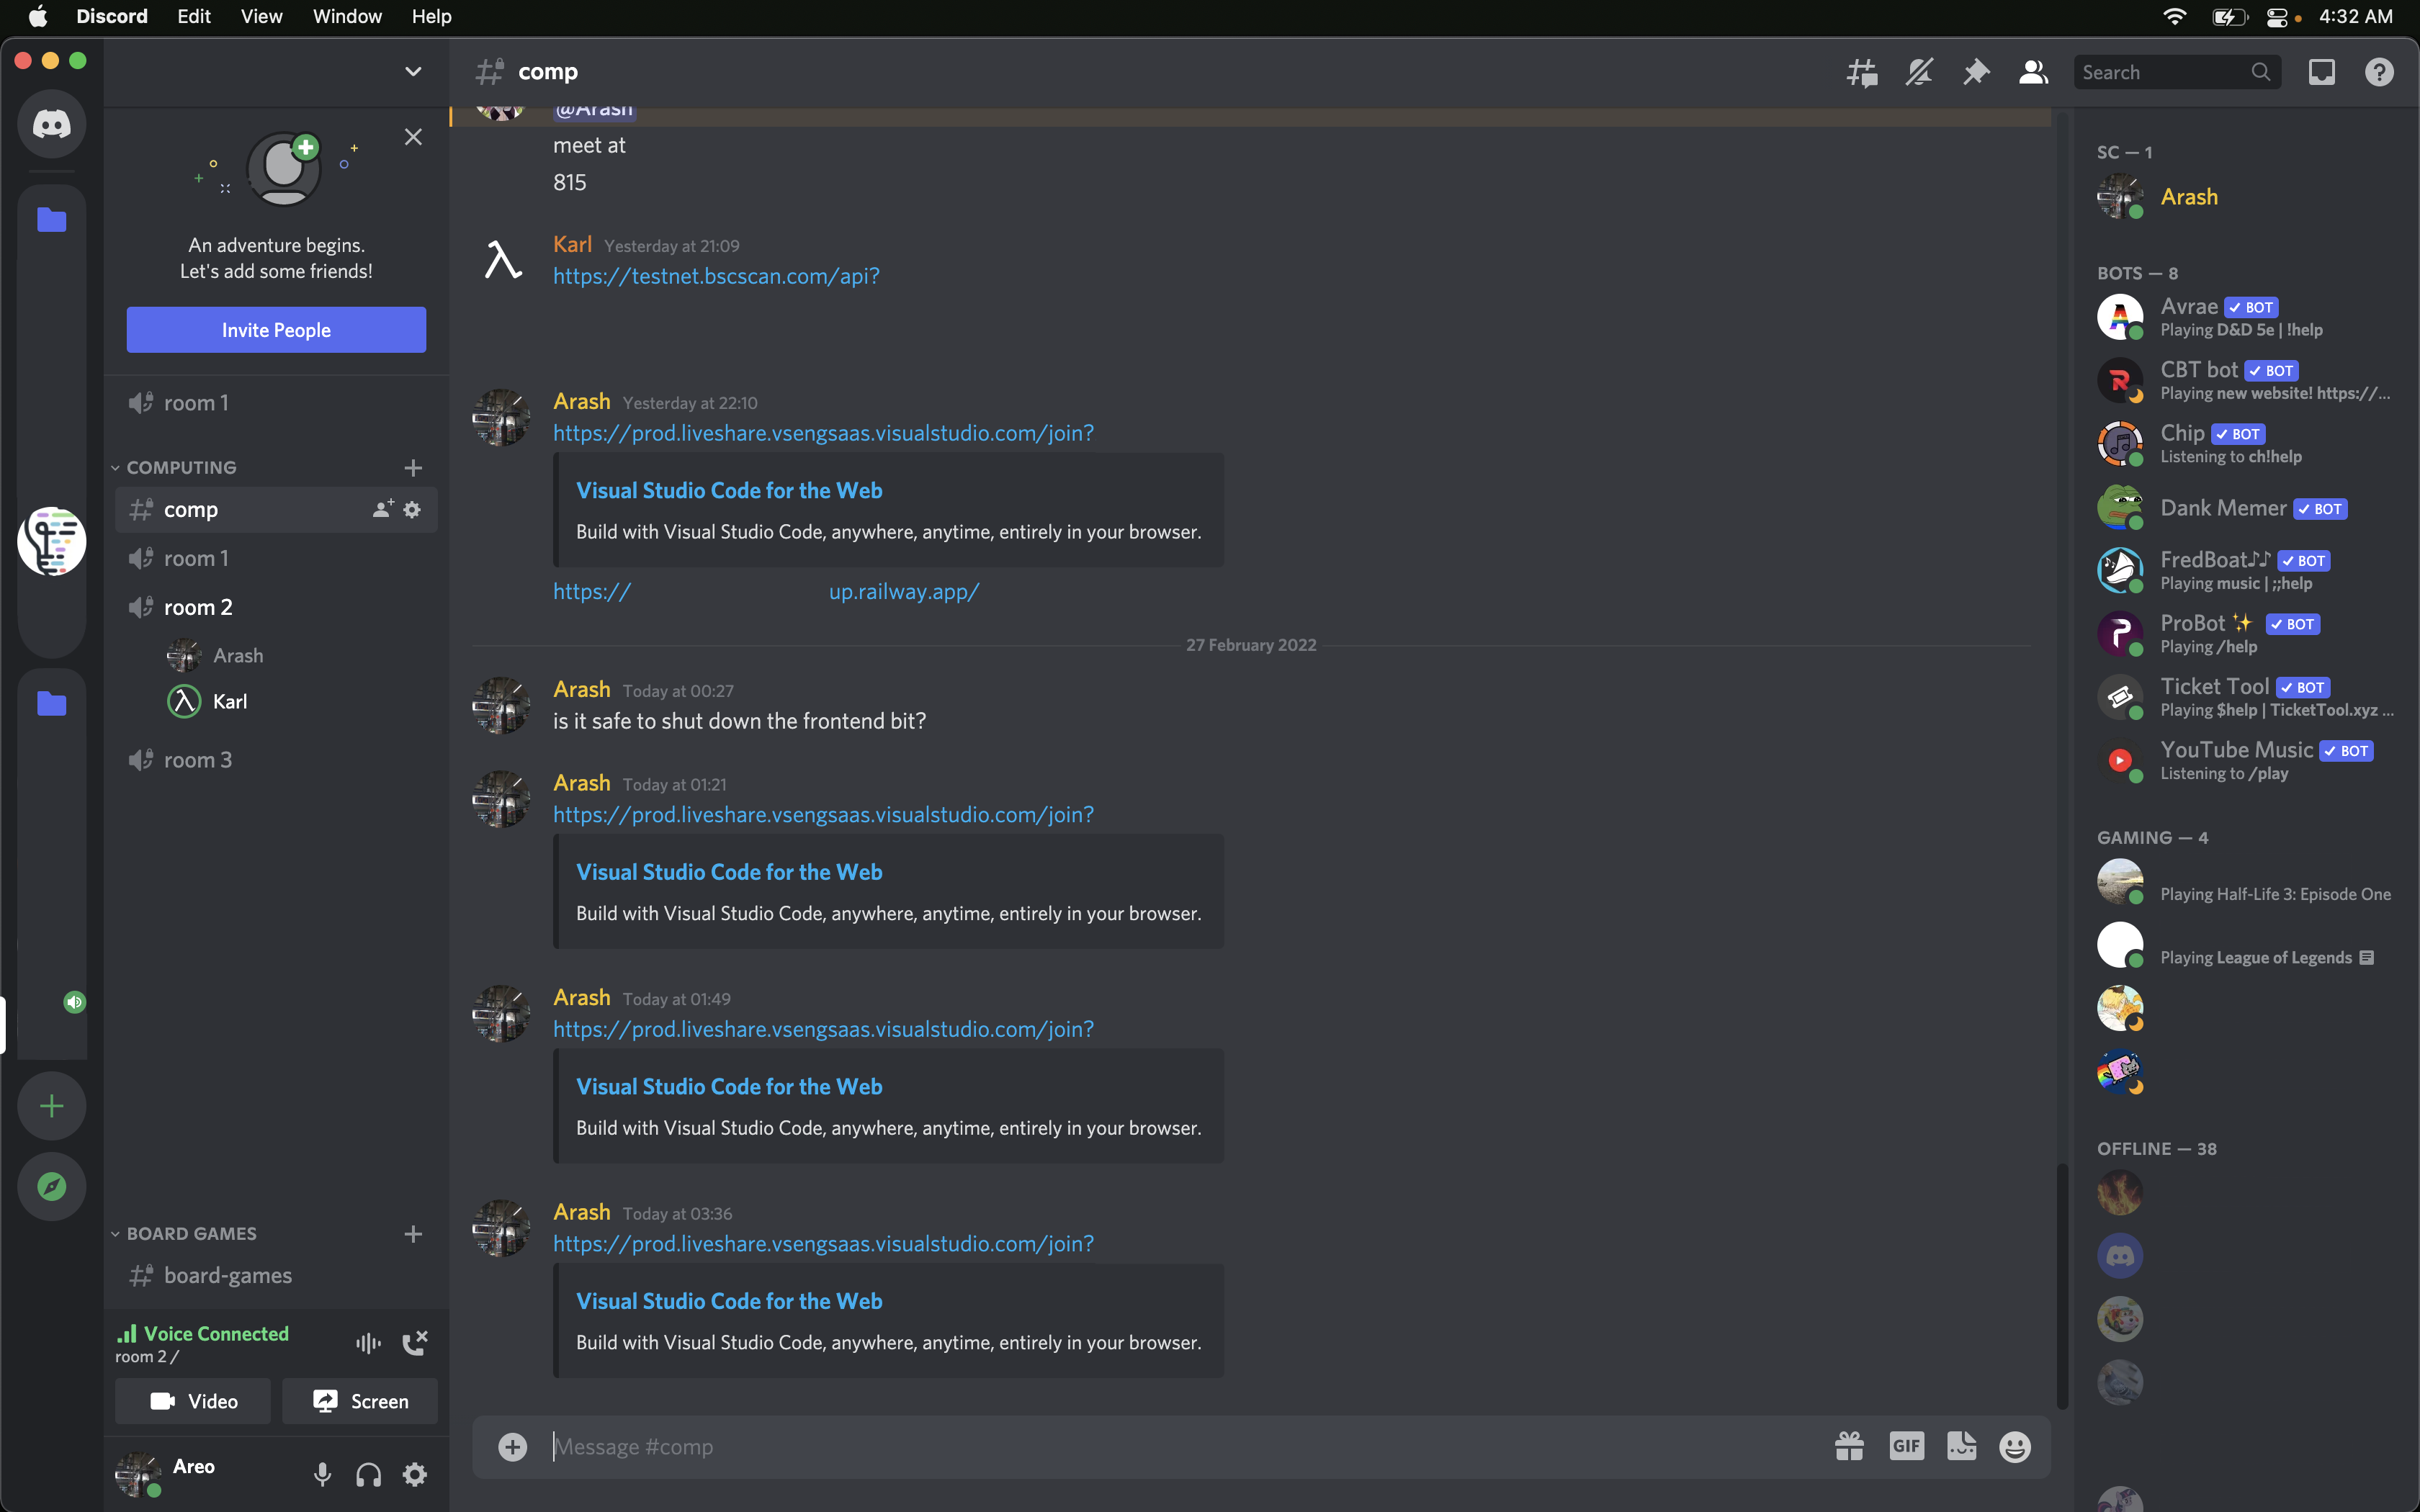 A Discord window showing the chat history throughout the hackathon